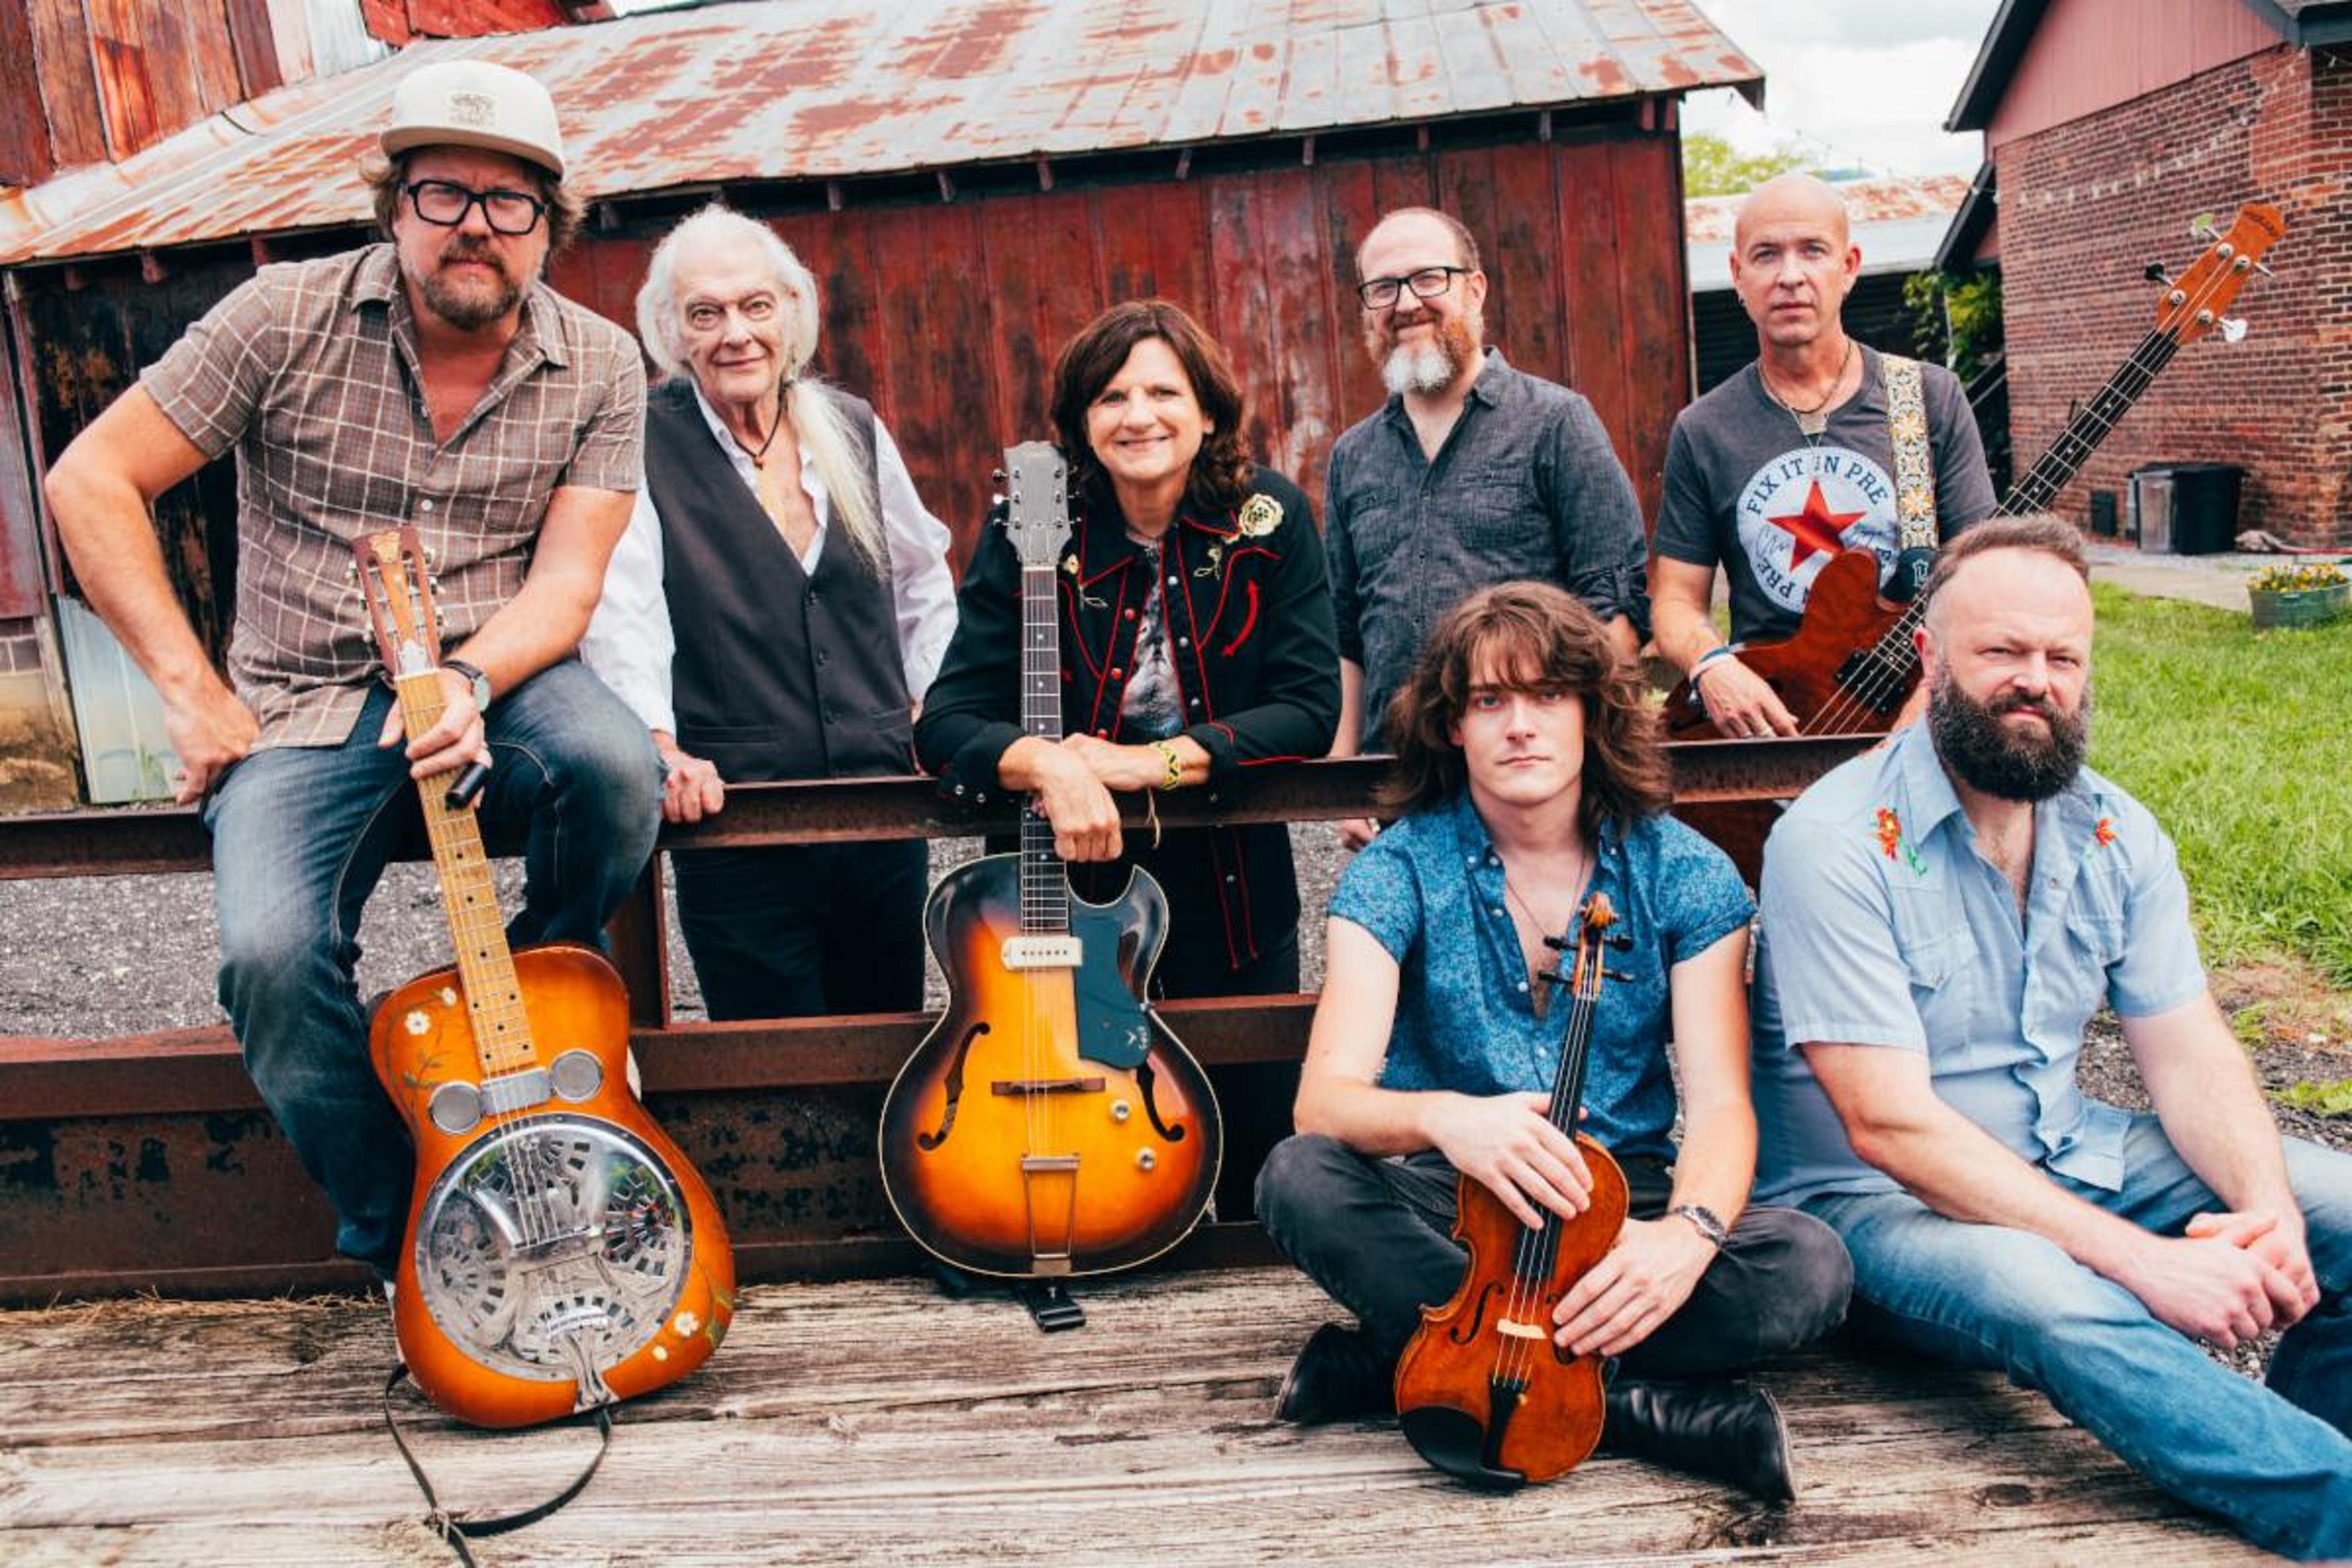 The AMY RAY BAND shares 2023 tour dates including Woodsongs, the Ryman and more